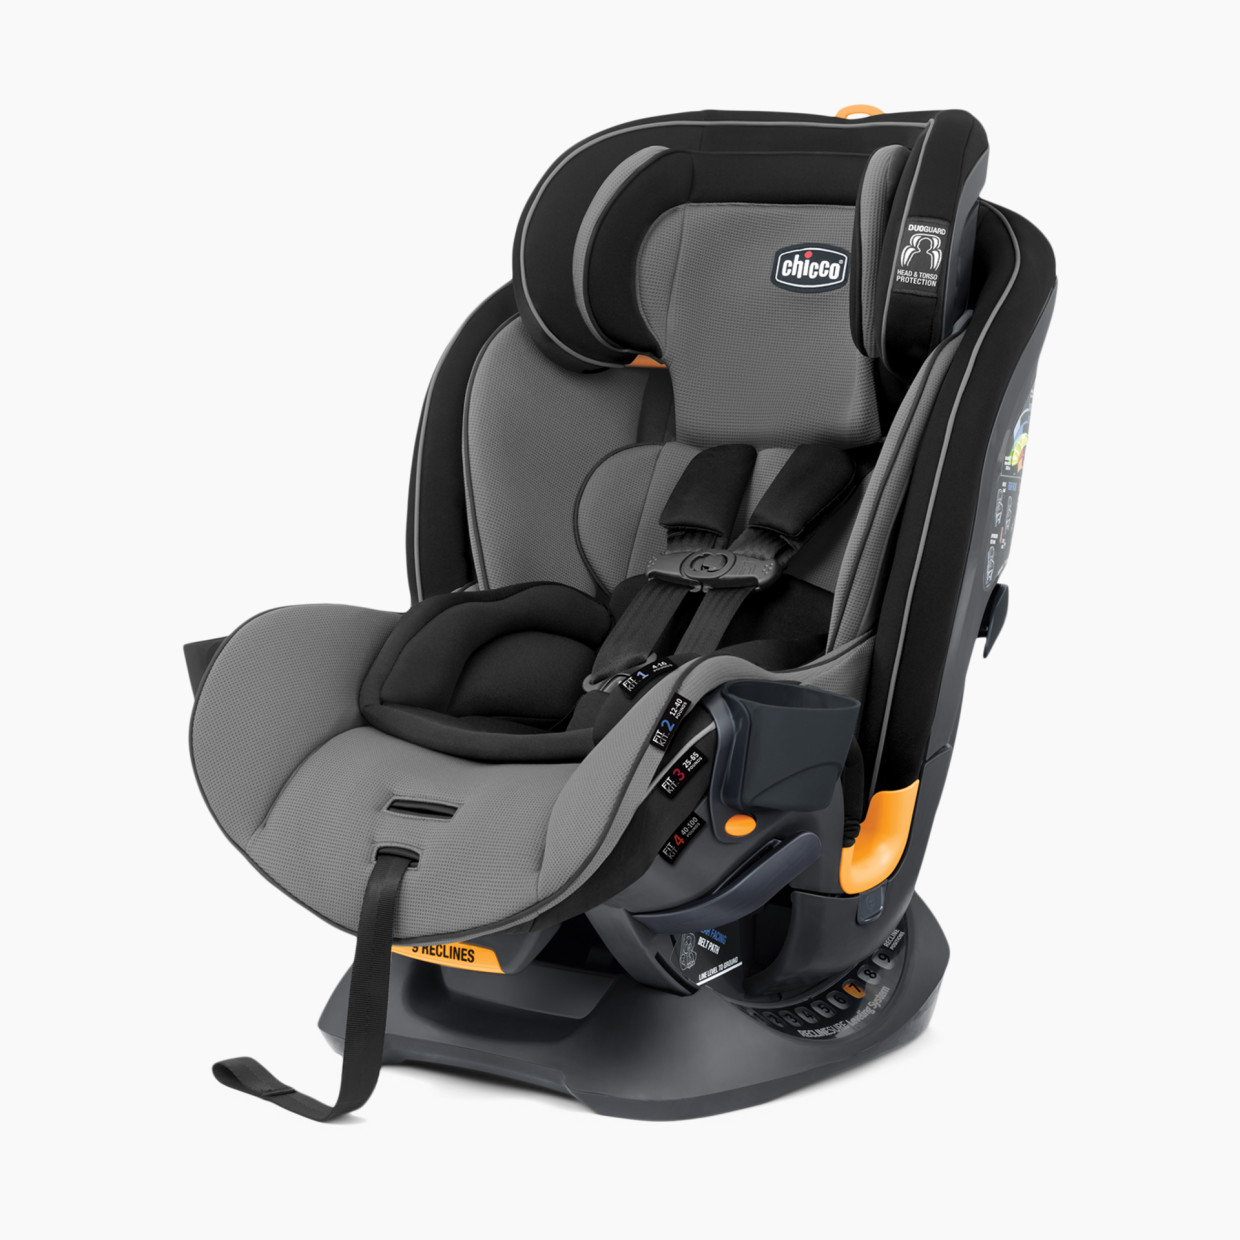 Chicco Fit4 4-In-1 Convertible Car Seat - Onyx.